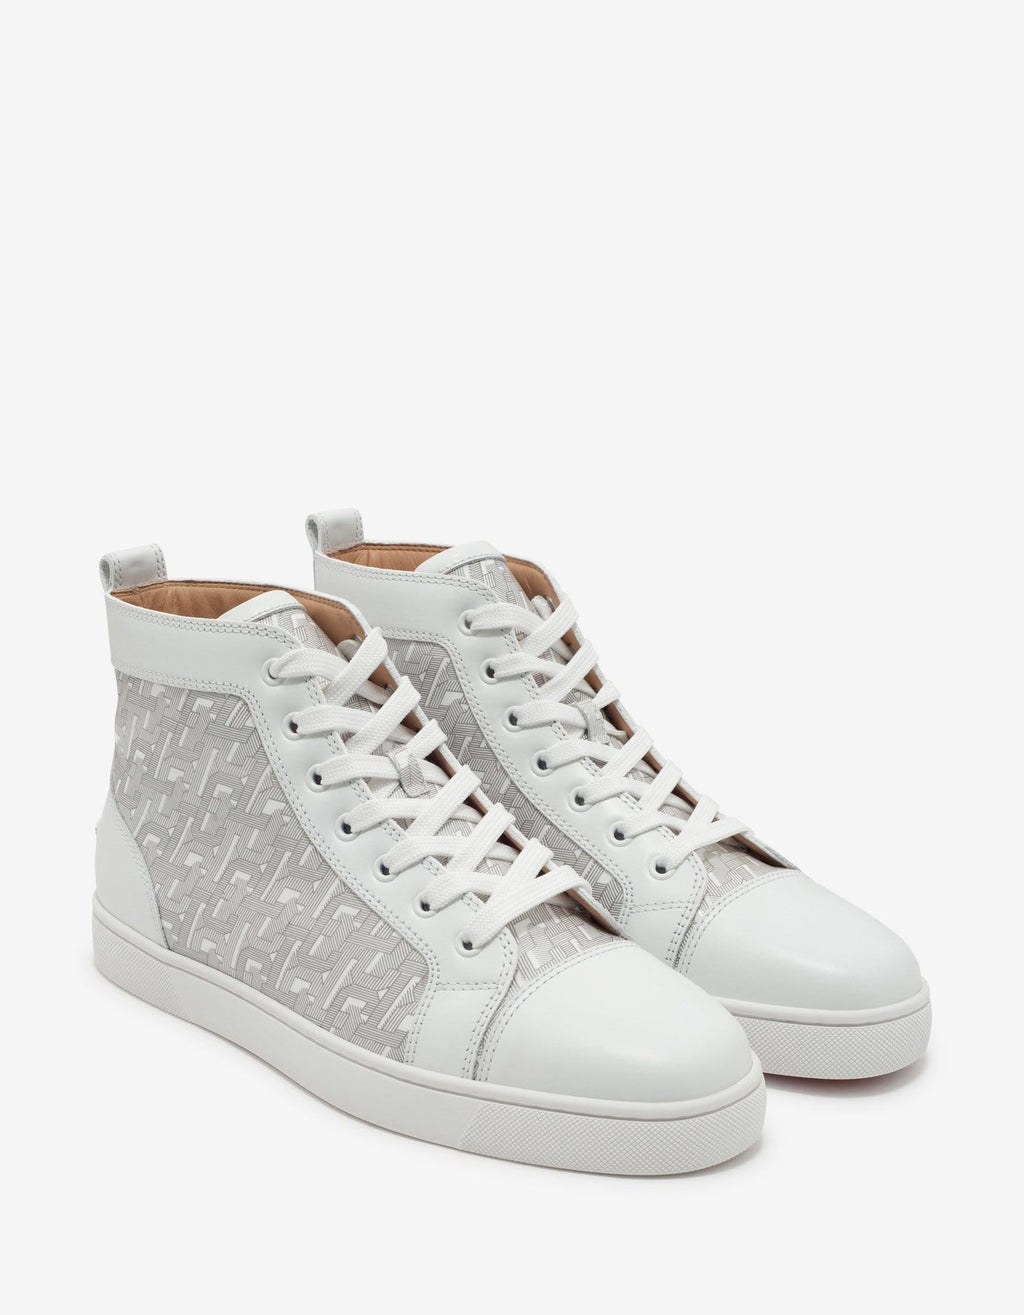 Christian Louboutin Christian Louboutin Louis CL Motif White High Top Trainers